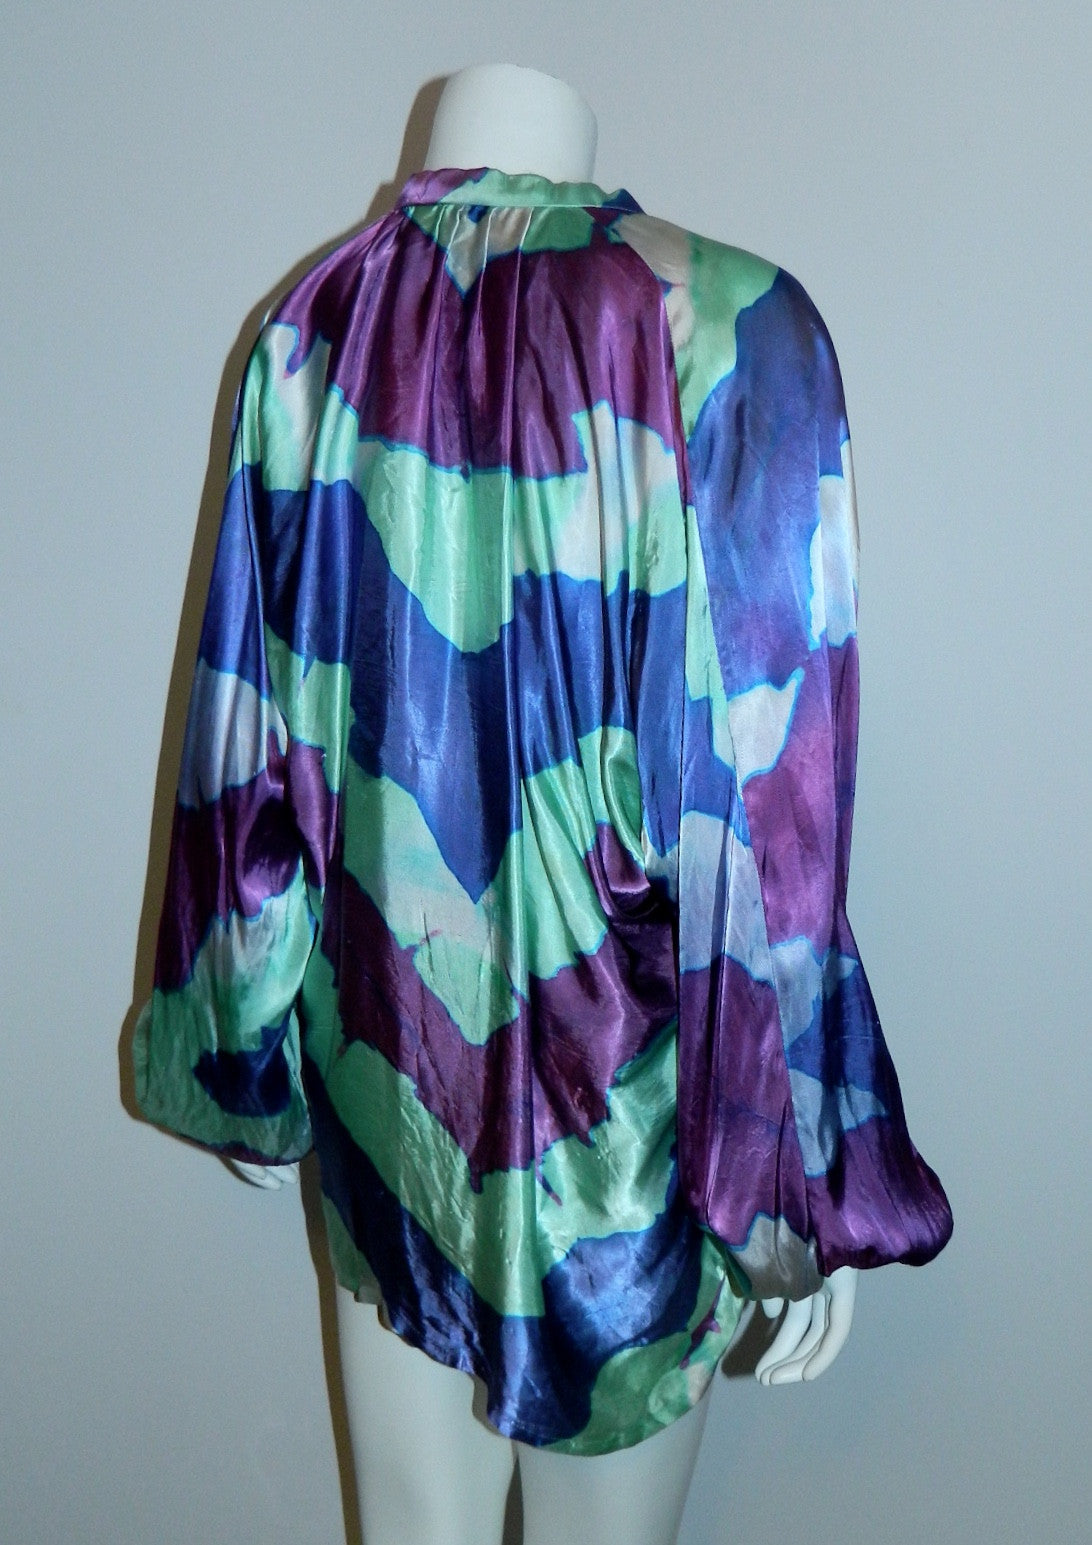 purple waves satin blouse / 1970s hand dyed vintage top / artist made OOAK